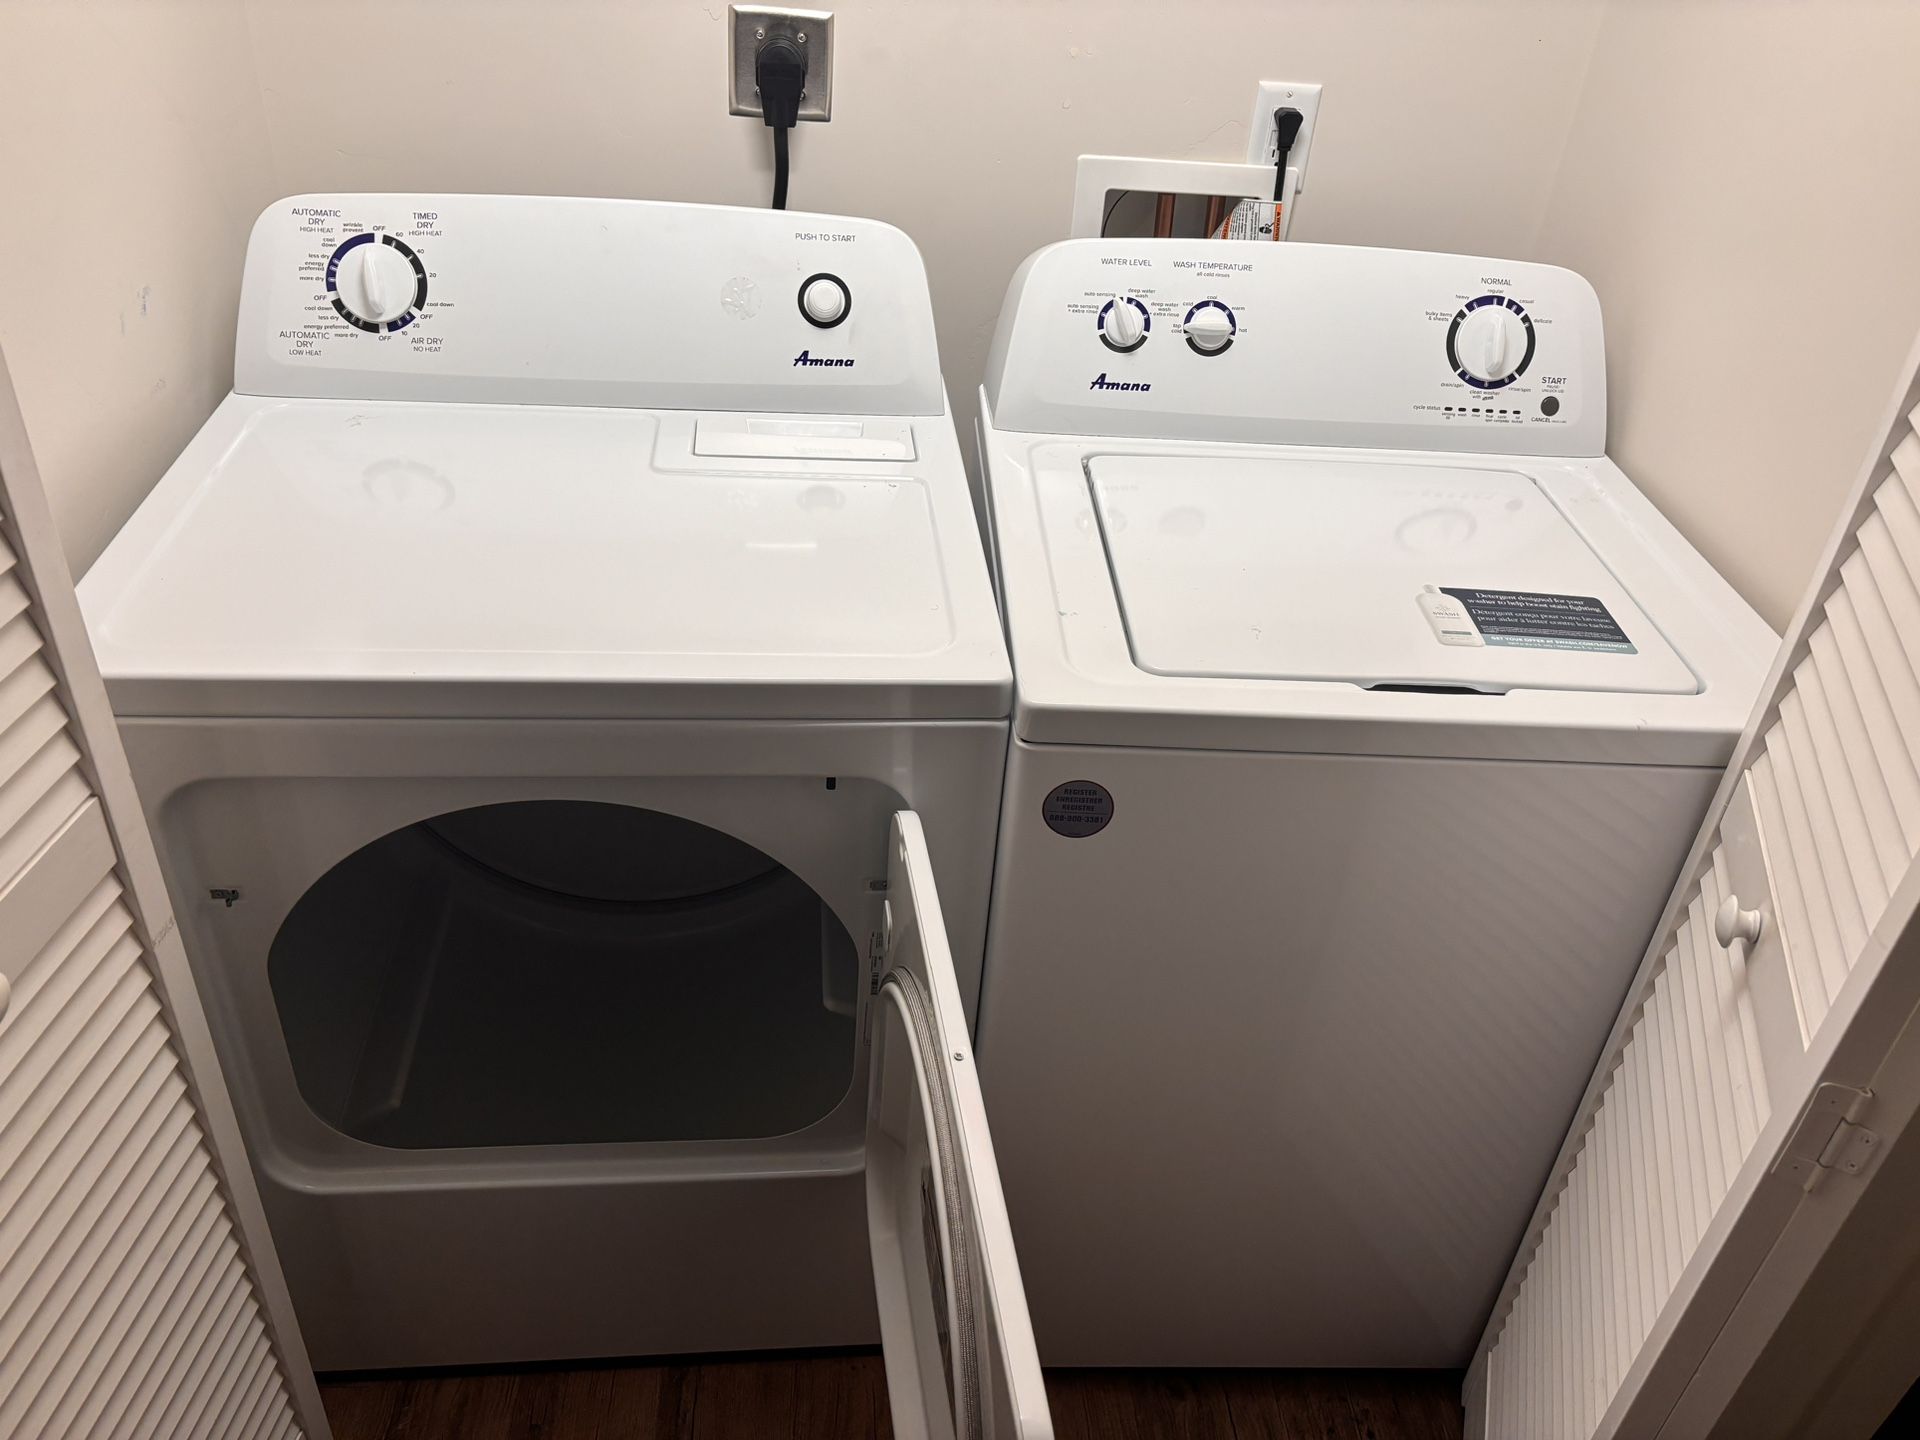 Amana Washer And Dryer Set *Pick Up Only*